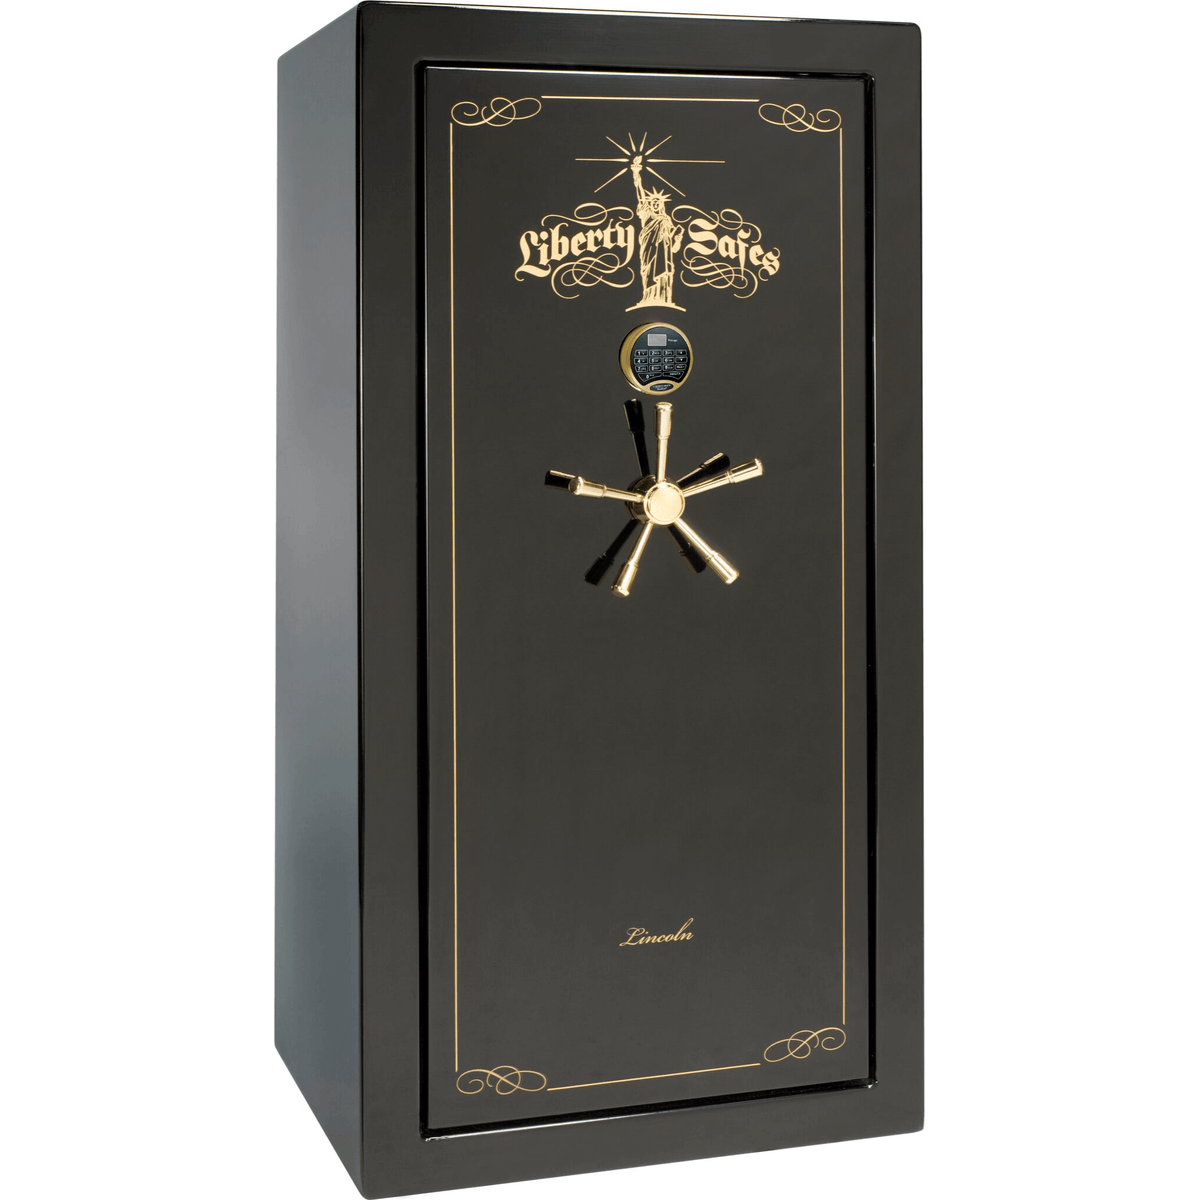 Liberty Lincoln 25 Safe in Black Gloss with Brass Electronic Lock.